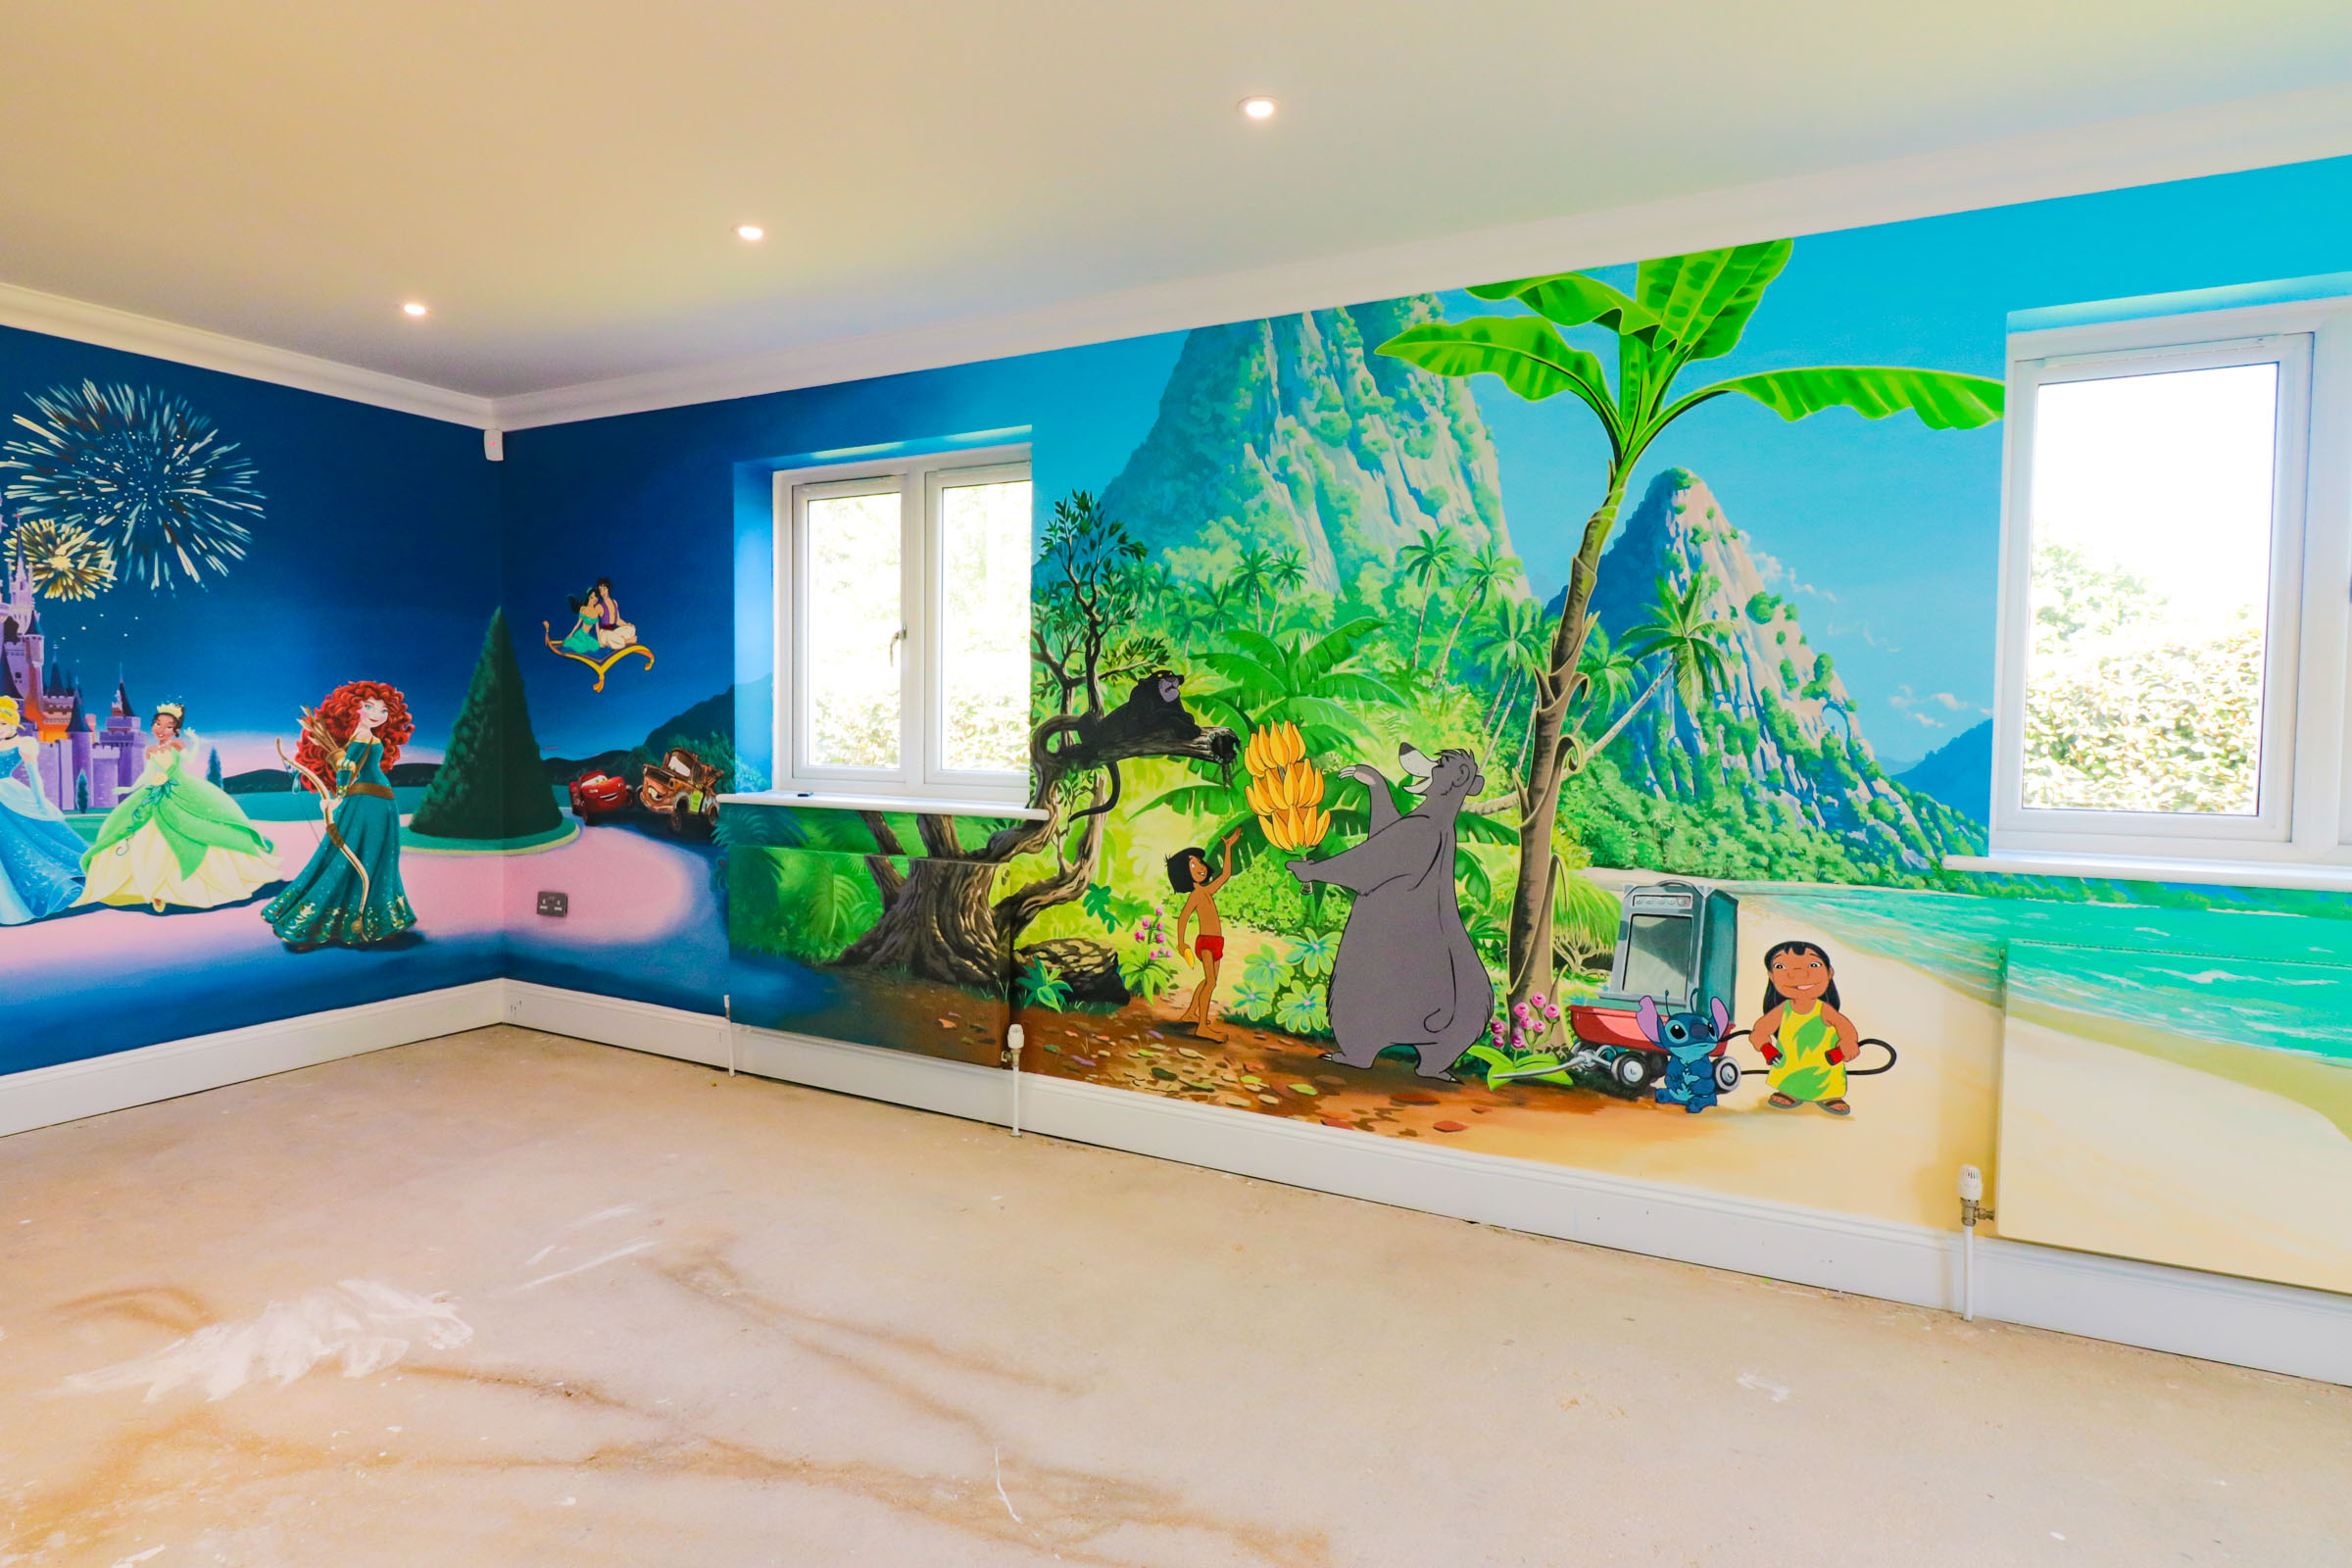 Playroom mural, Moana background scene with Ariel and the more Little Mermaid characters